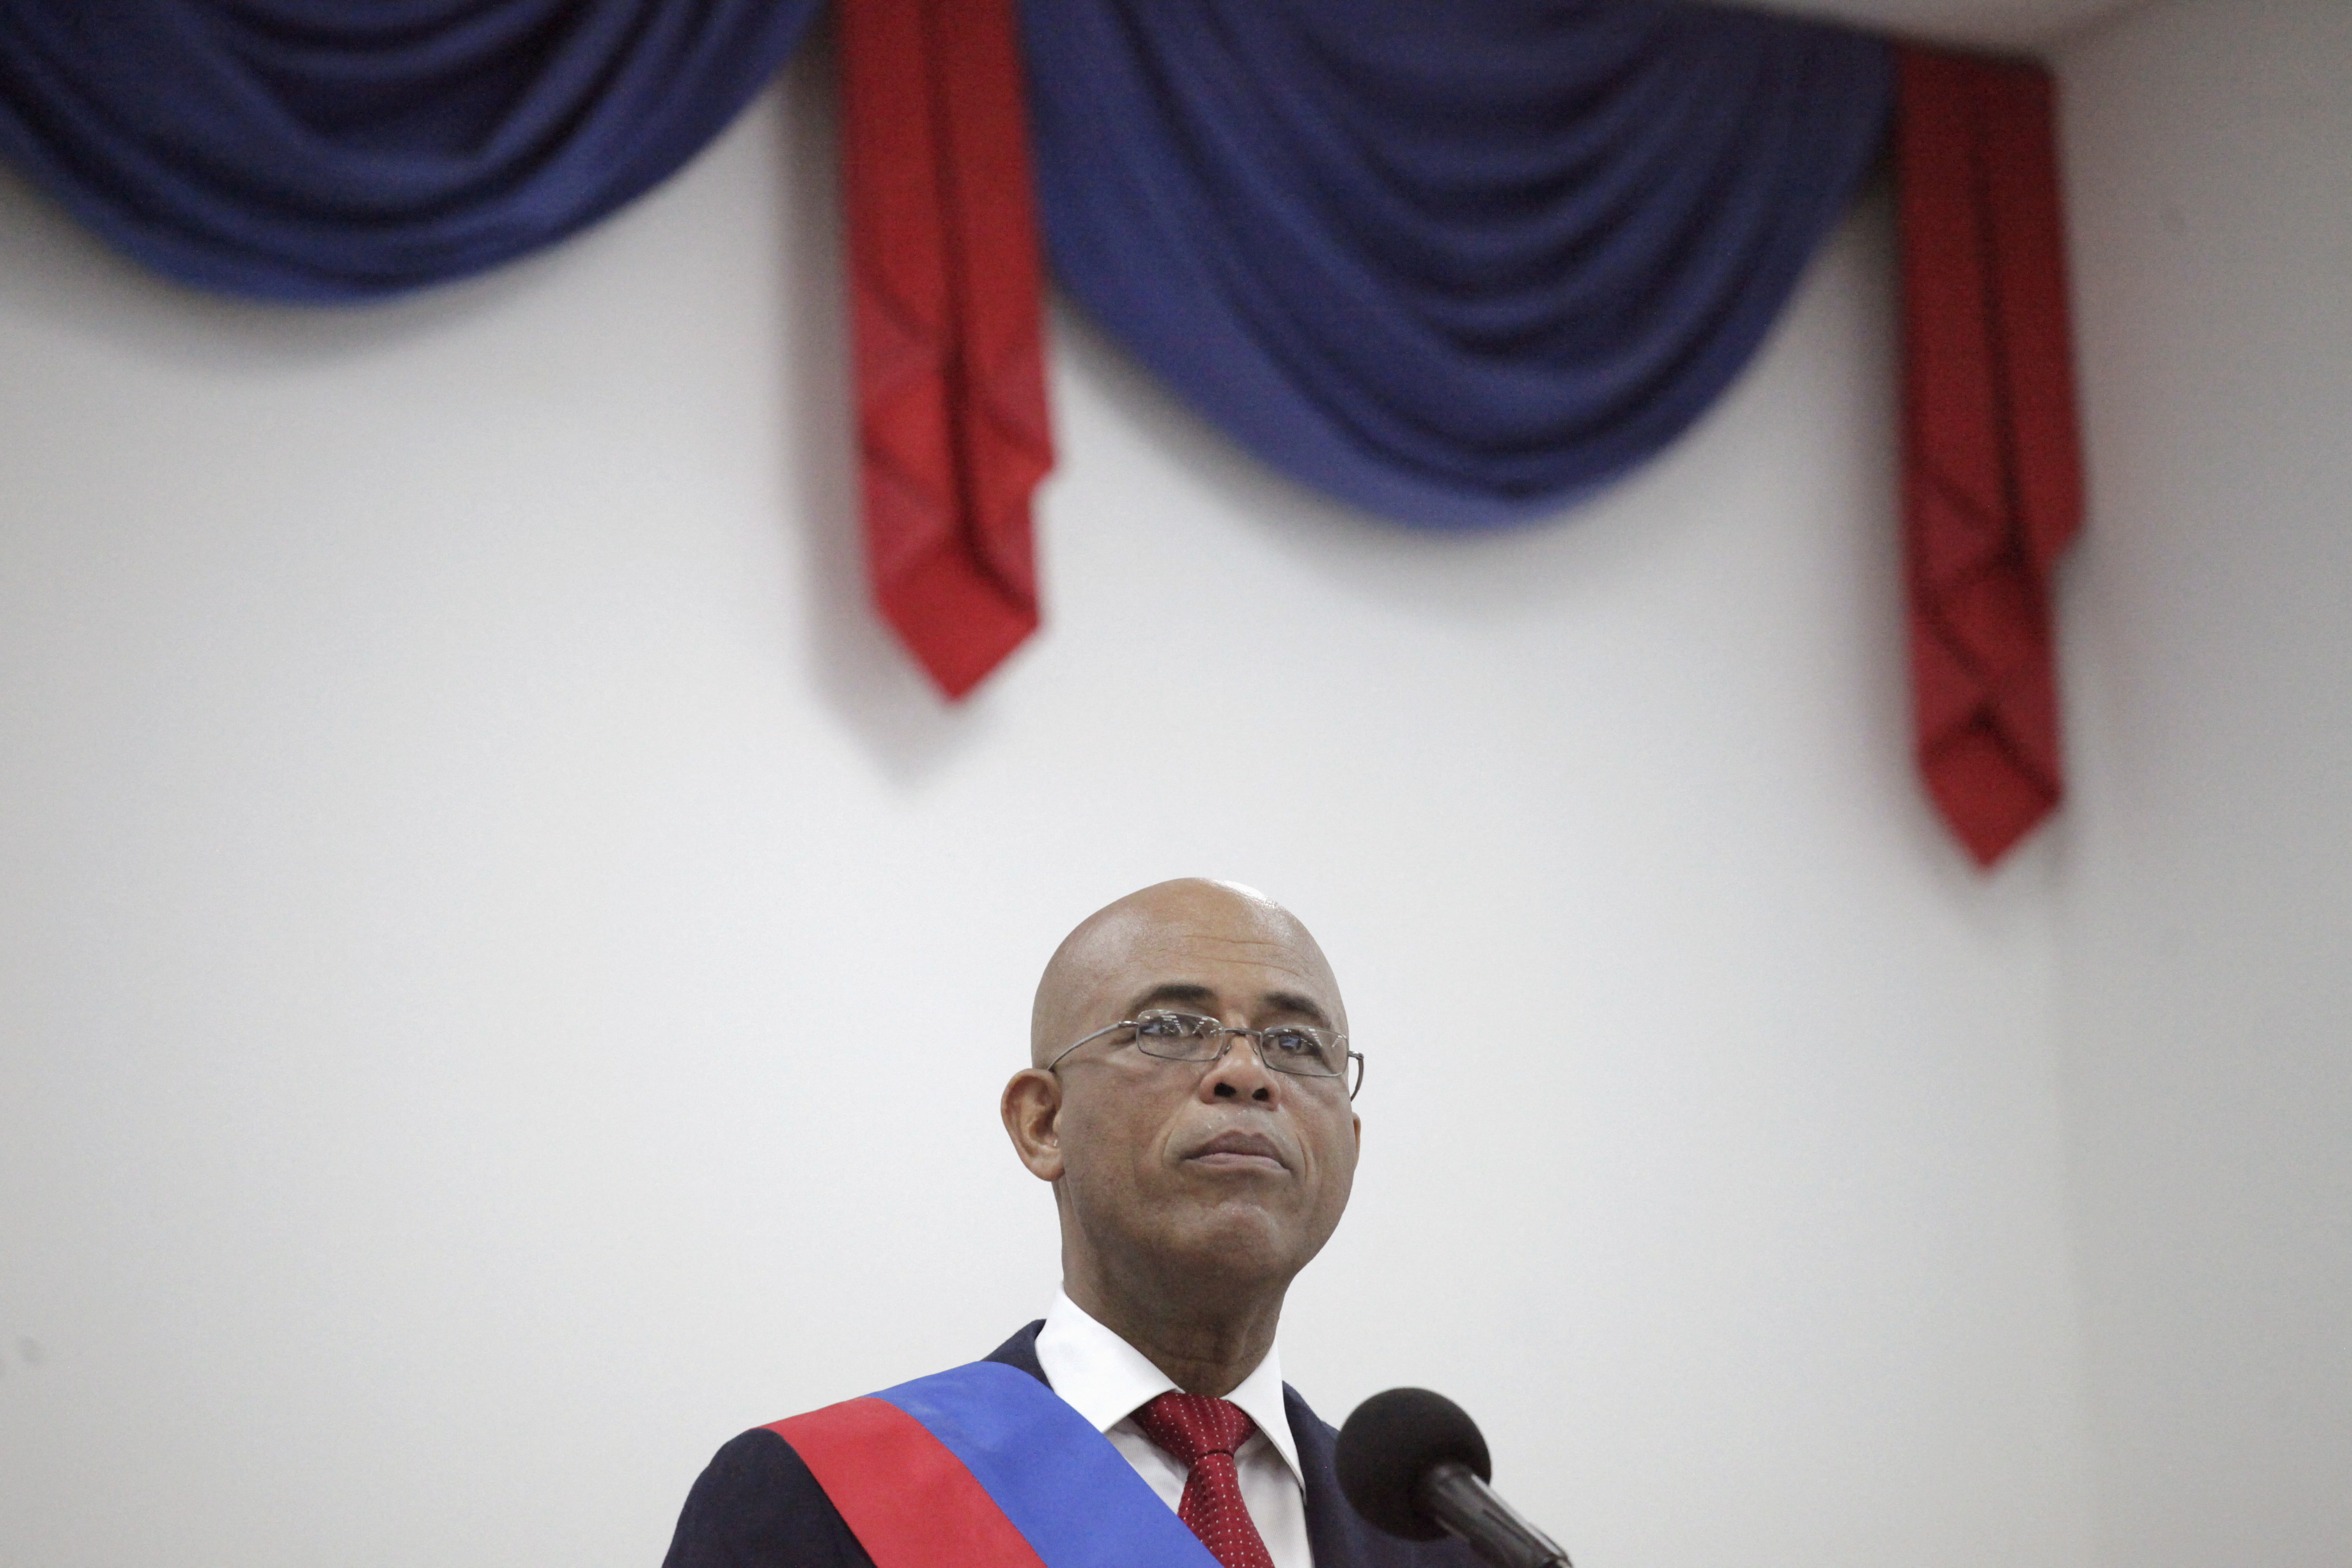 Martelly speaks at a ceremony in Port-au-Prince